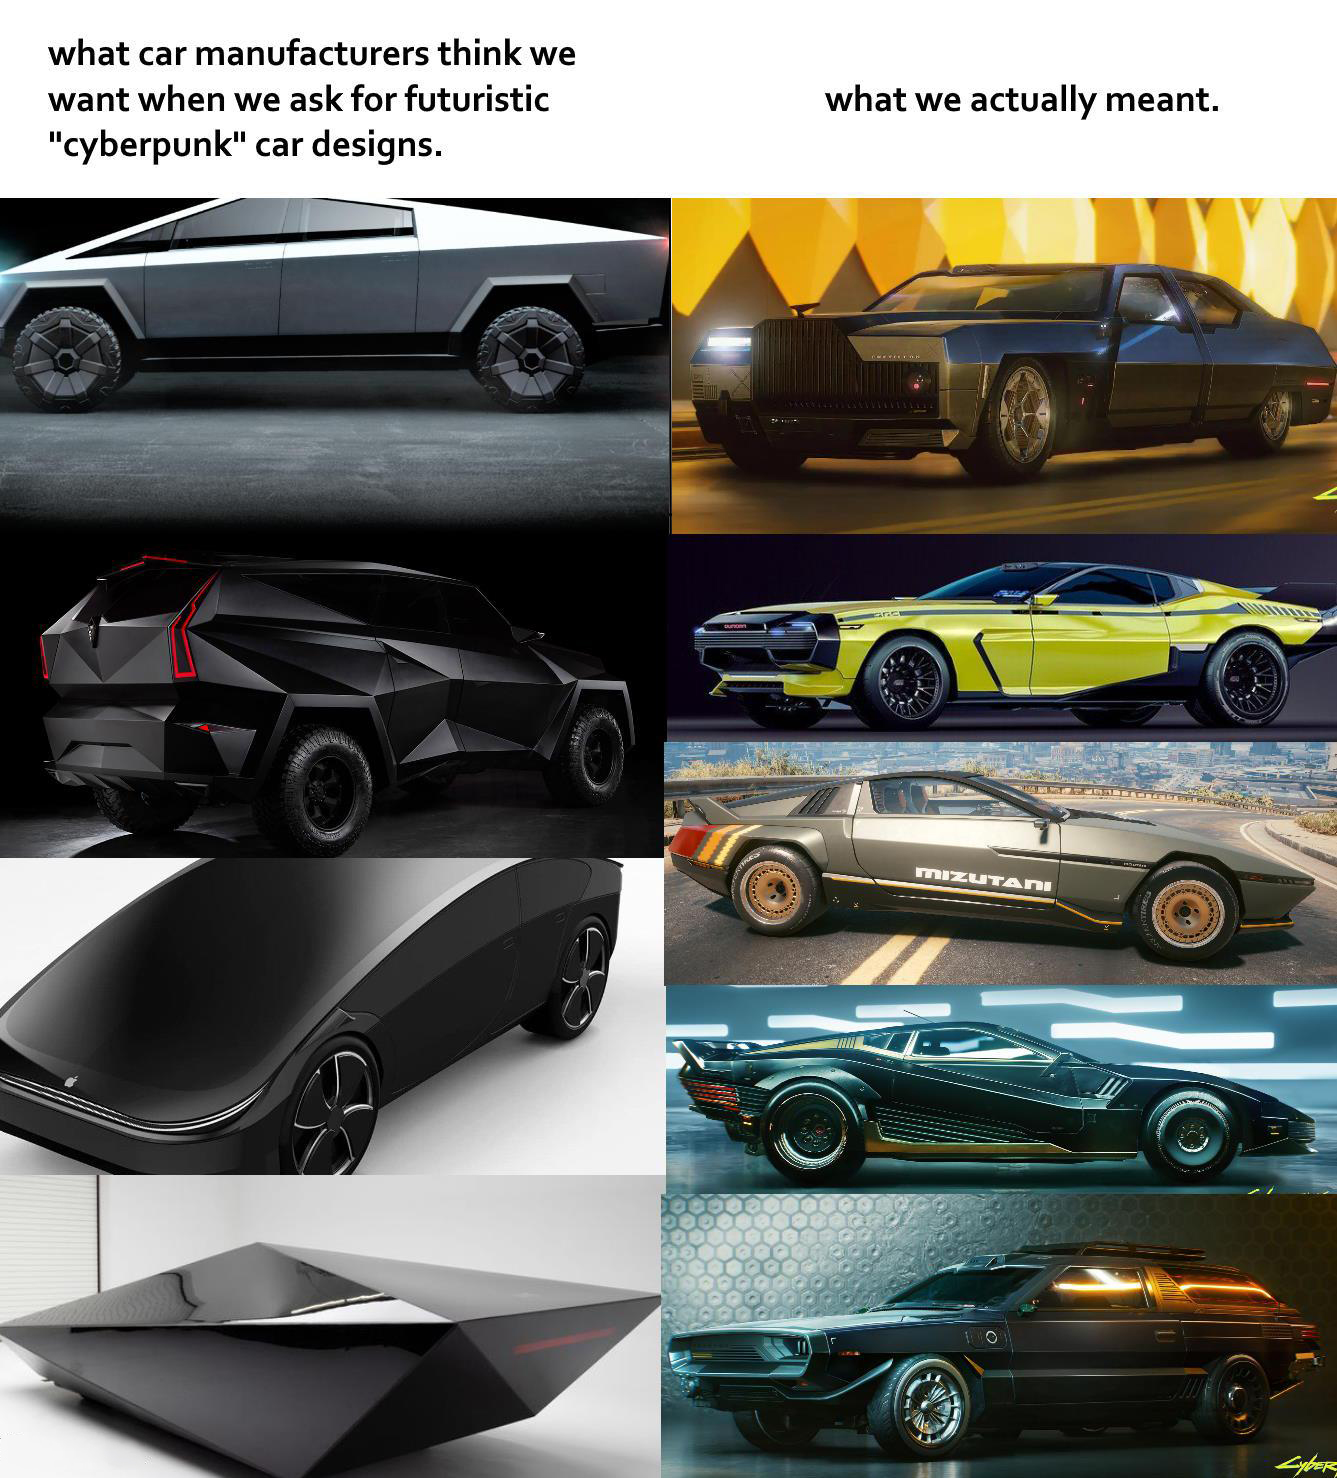 gaming dank memes - Cyberpunk 2077 - what car manufacturers think we want when we ask for futuristic